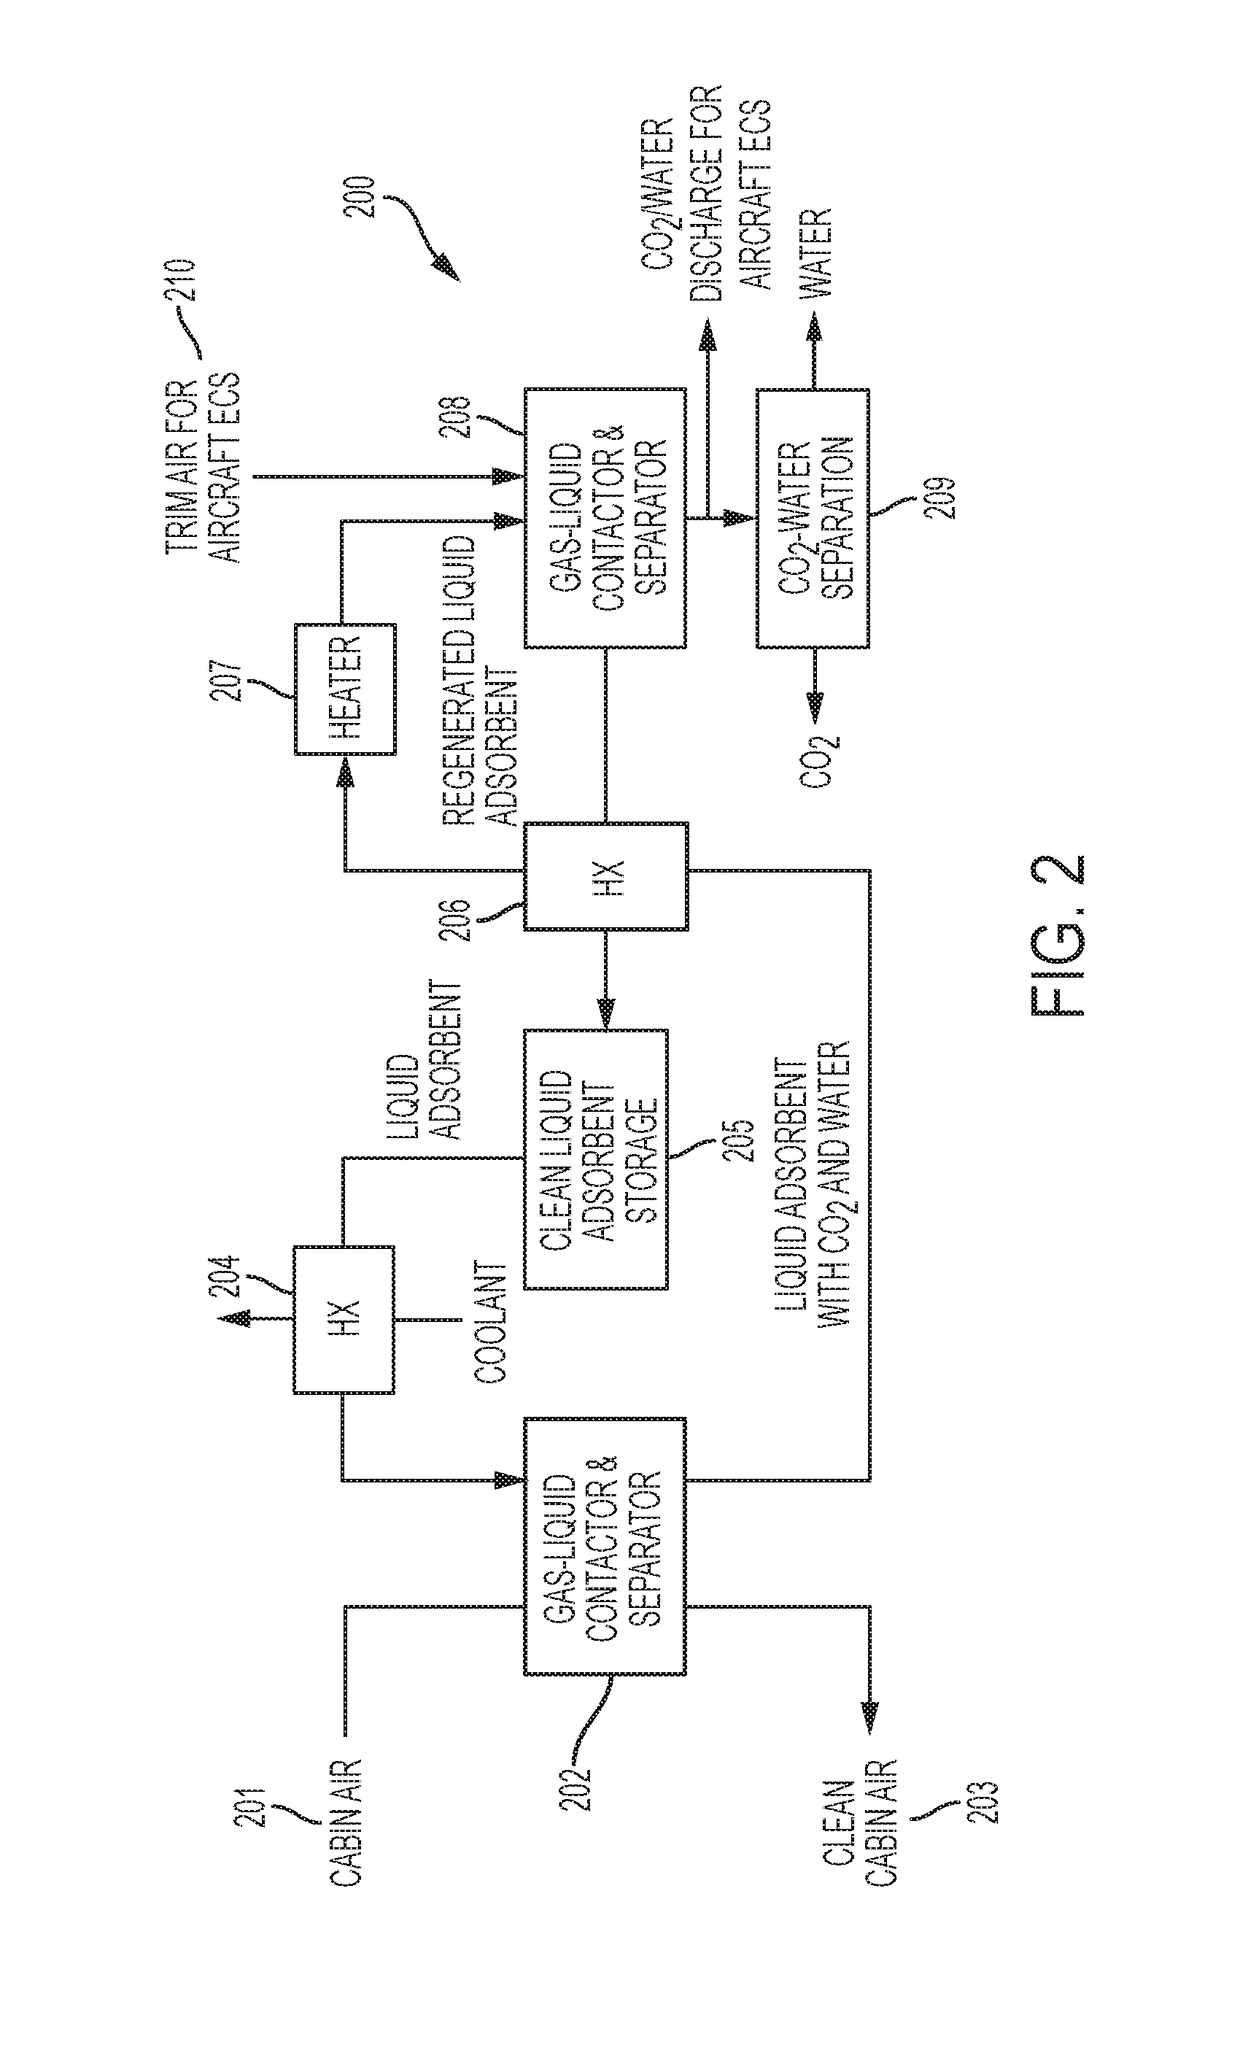 Apparatus and methods for enhancing gas-liquid contact/separation